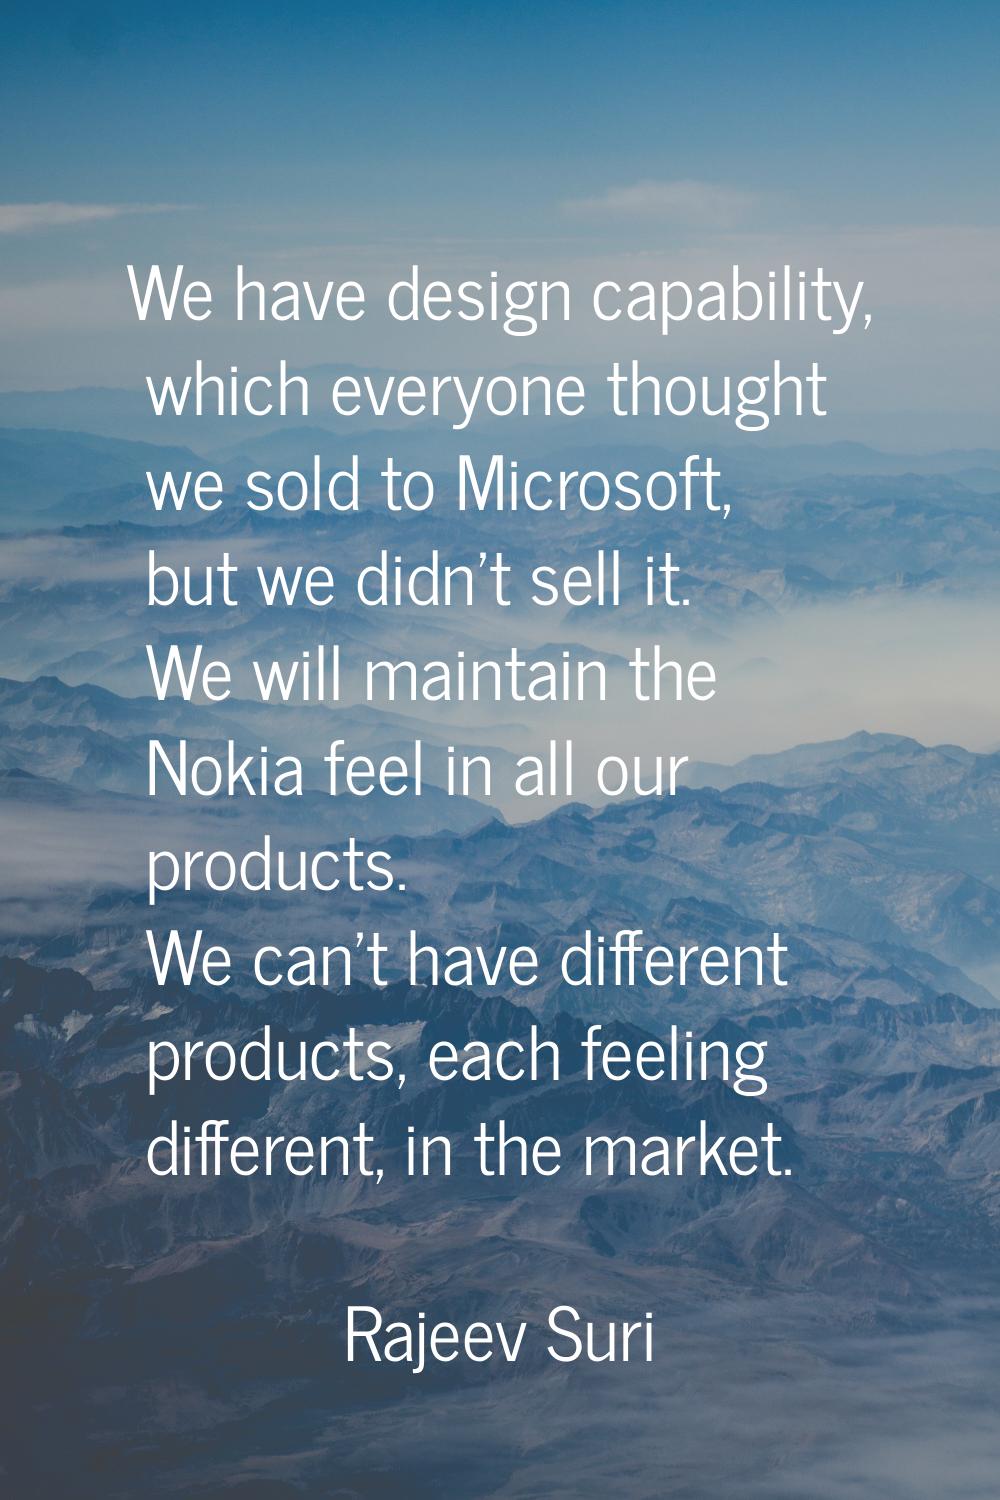 We have design capability, which everyone thought we sold to Microsoft, but we didn't sell it. We w